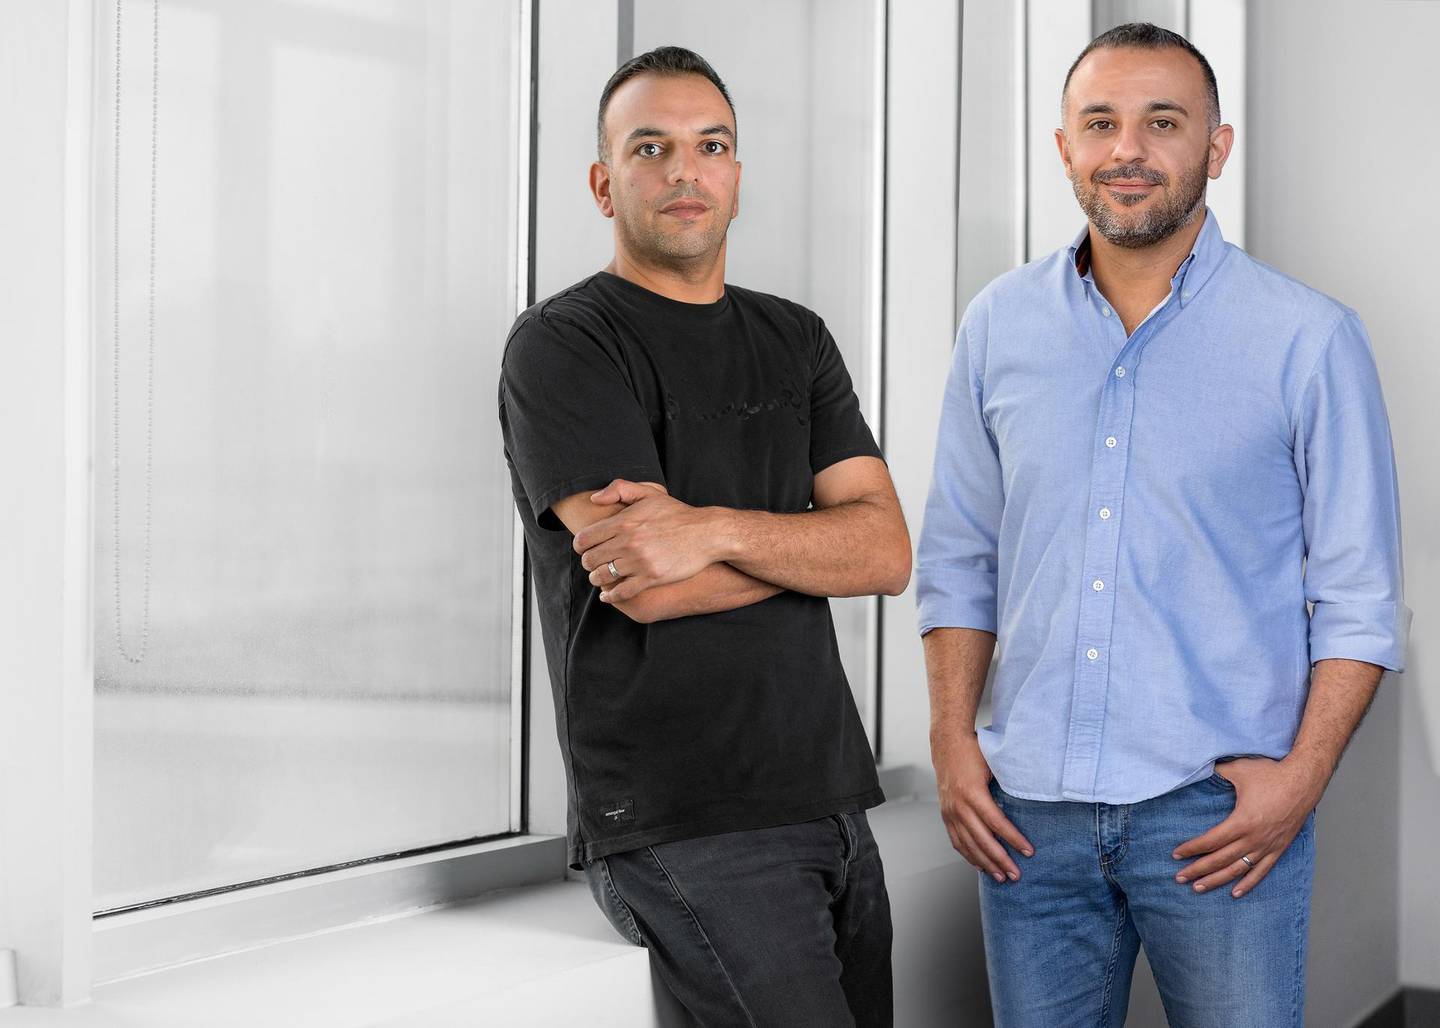 Ashraf Atia, chief operating officer, and Ramy Assaf, co-founder and chief executive of Zbooni, say the Covid-19 pandemic has accelerated the trend for digital adoption among UAE enterprises. Photo: Courtesy Zbooni